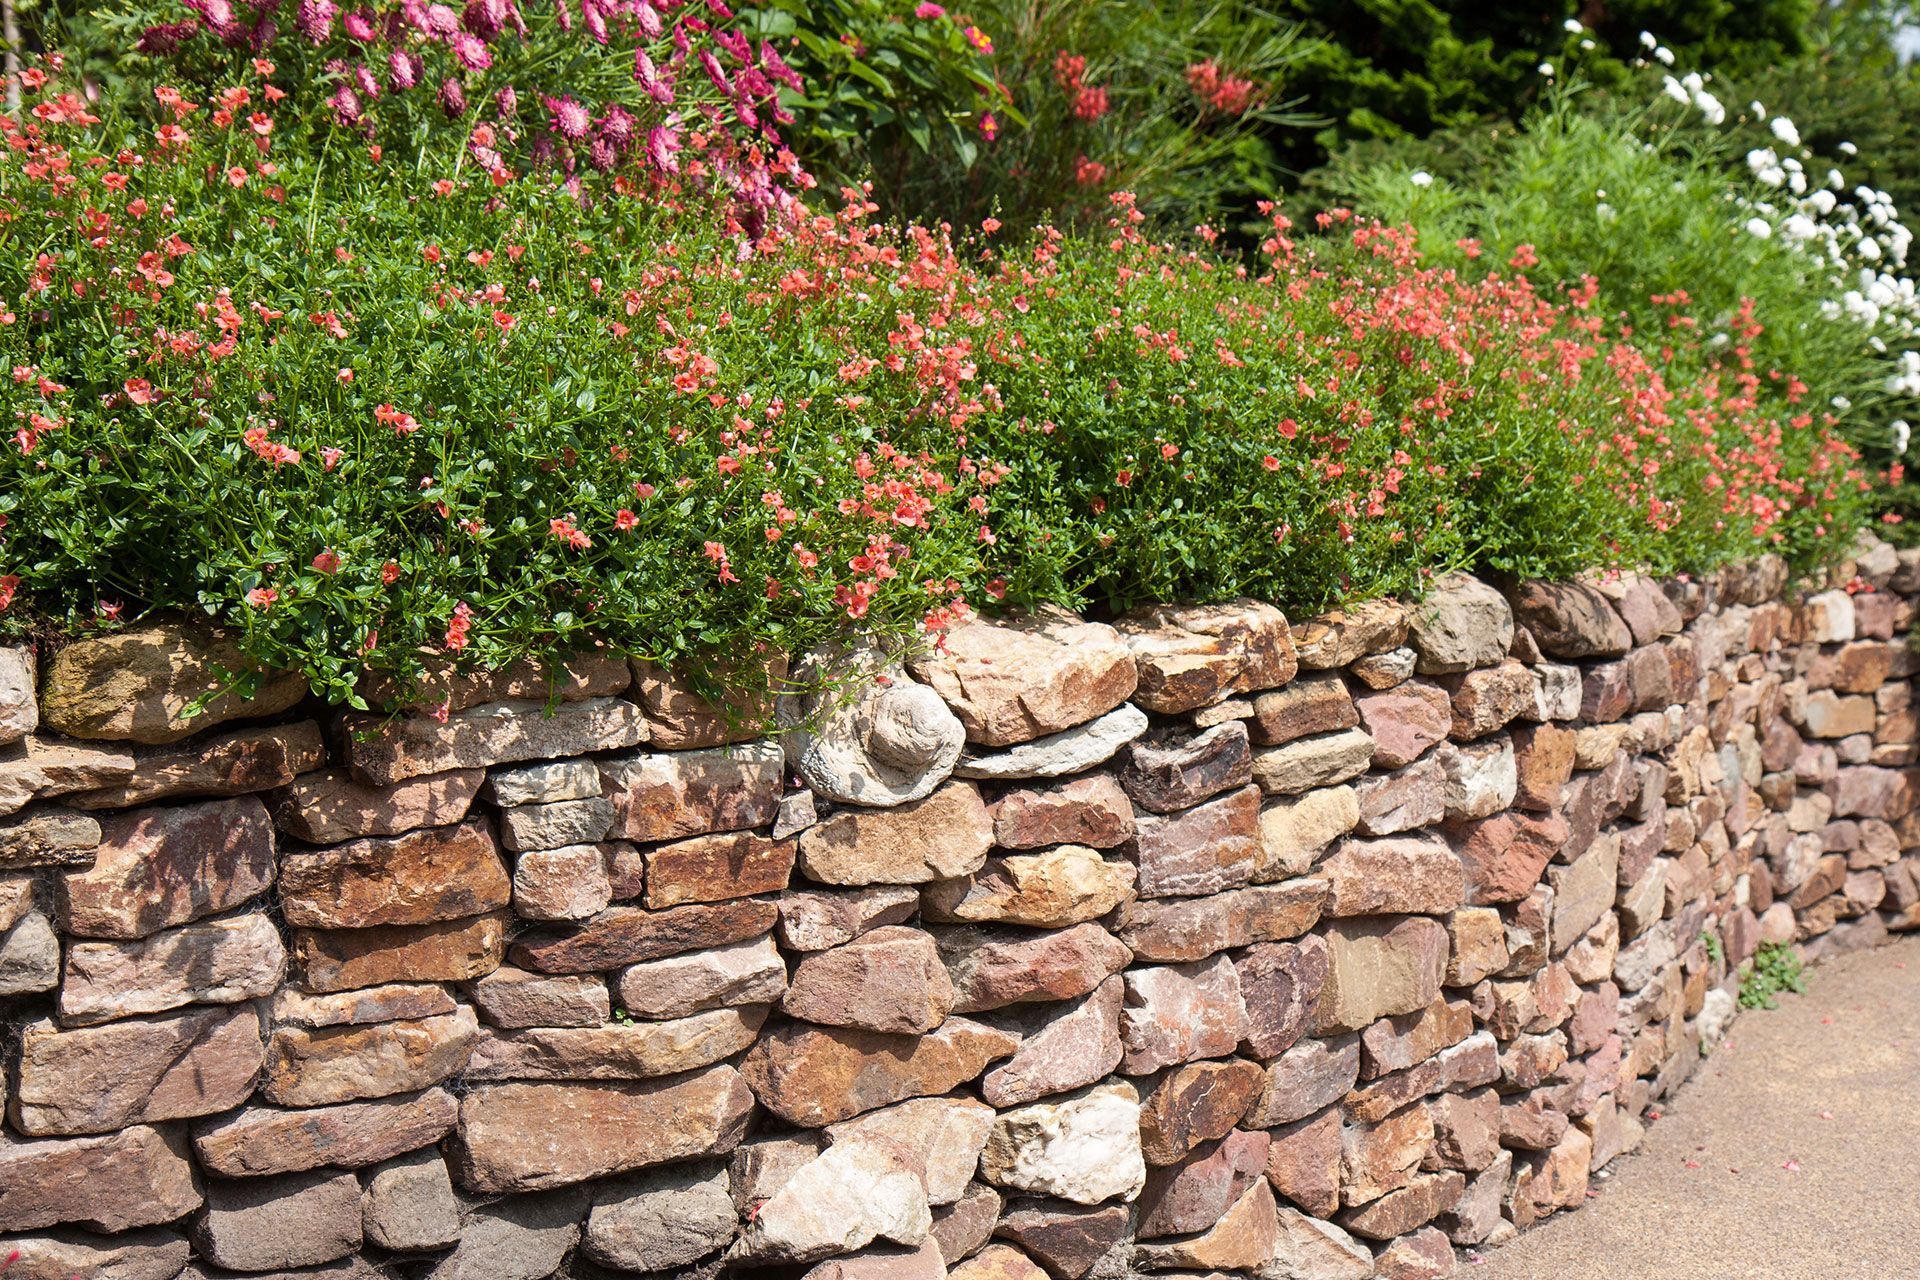 A stone retaining wall with flowers growing on it